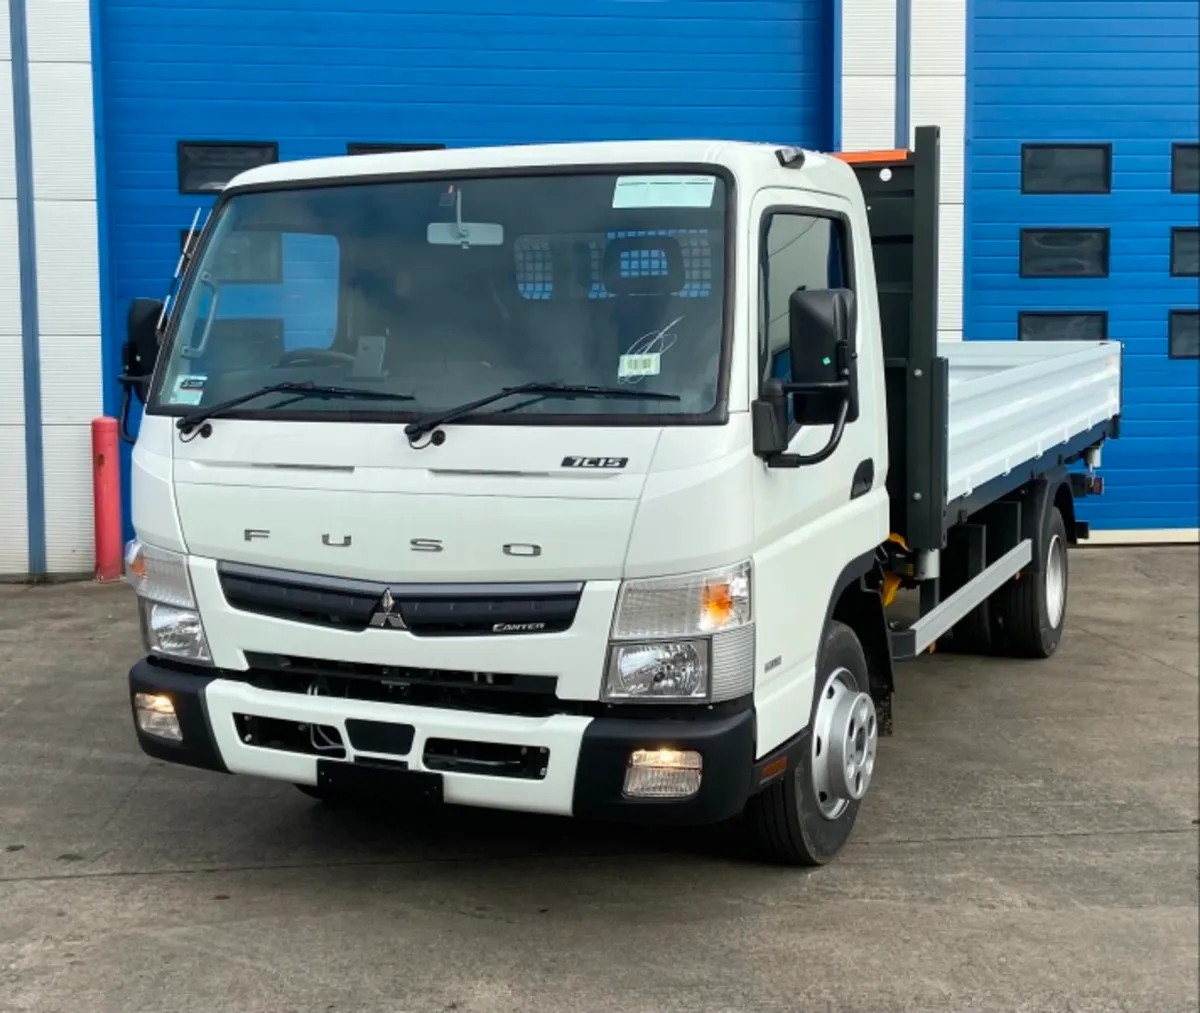 Fuso Canter 7.5 Ton 3 Way Tipper Available Now - Image 1